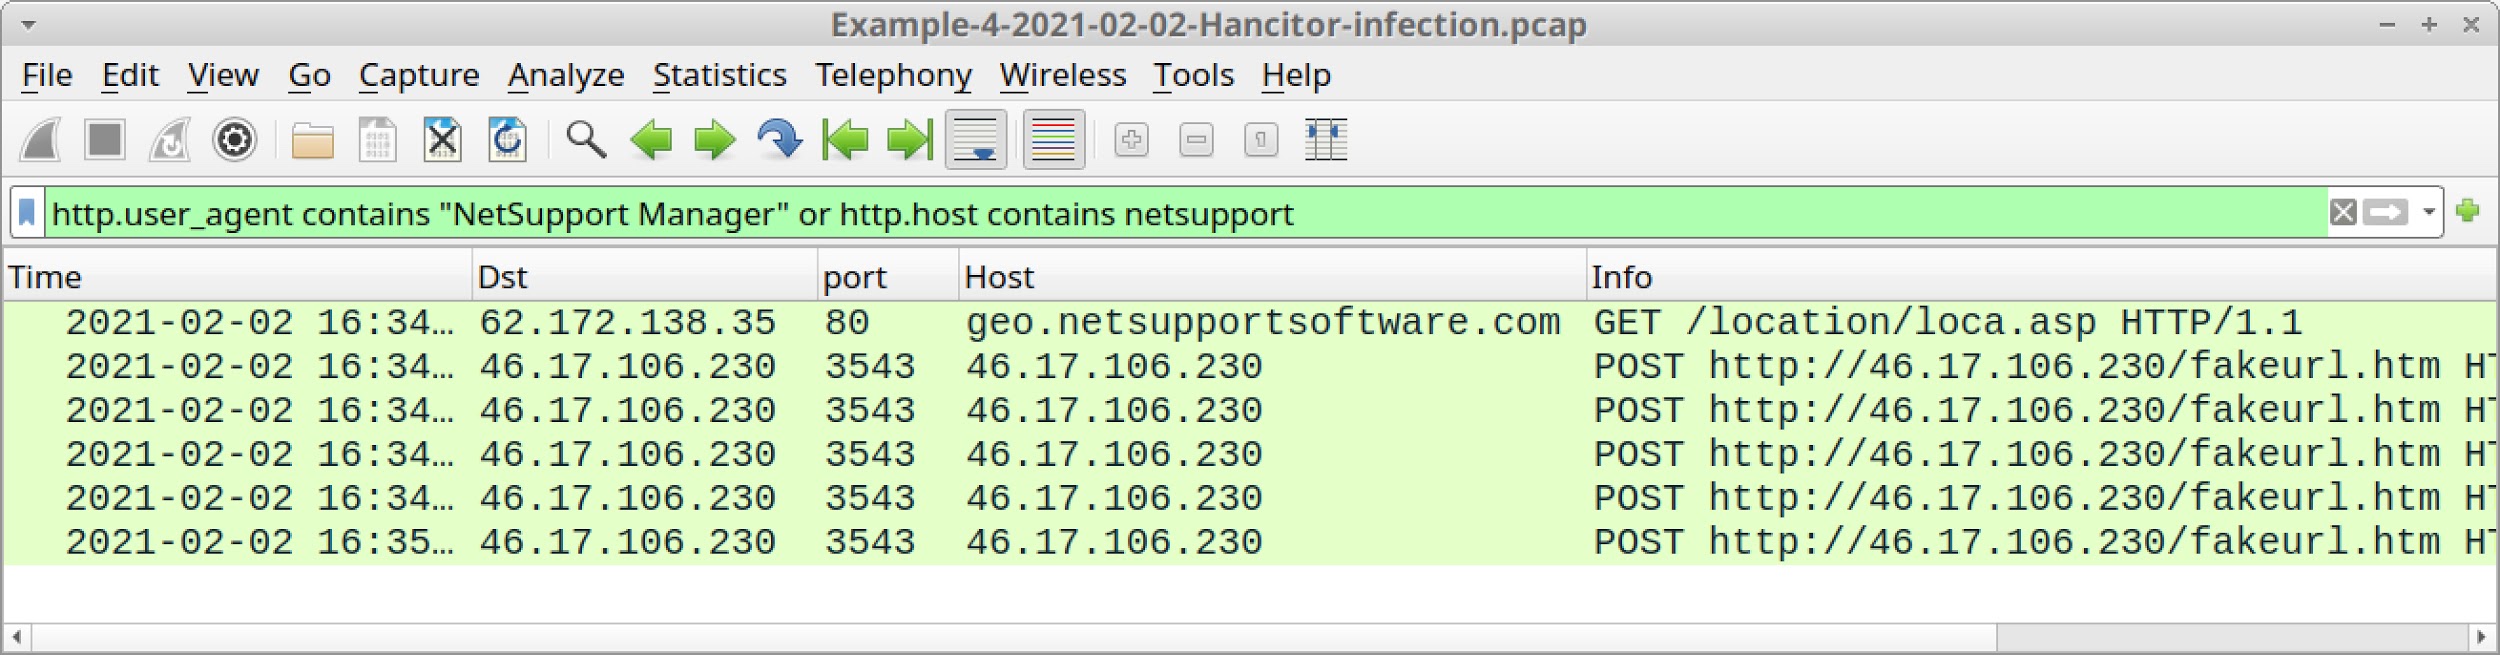 This is an example of how traffic generated by NetSupport Manager RAT should appear in Wireshark after being surfaced by the suggested "NetSupport Manager" filter. 